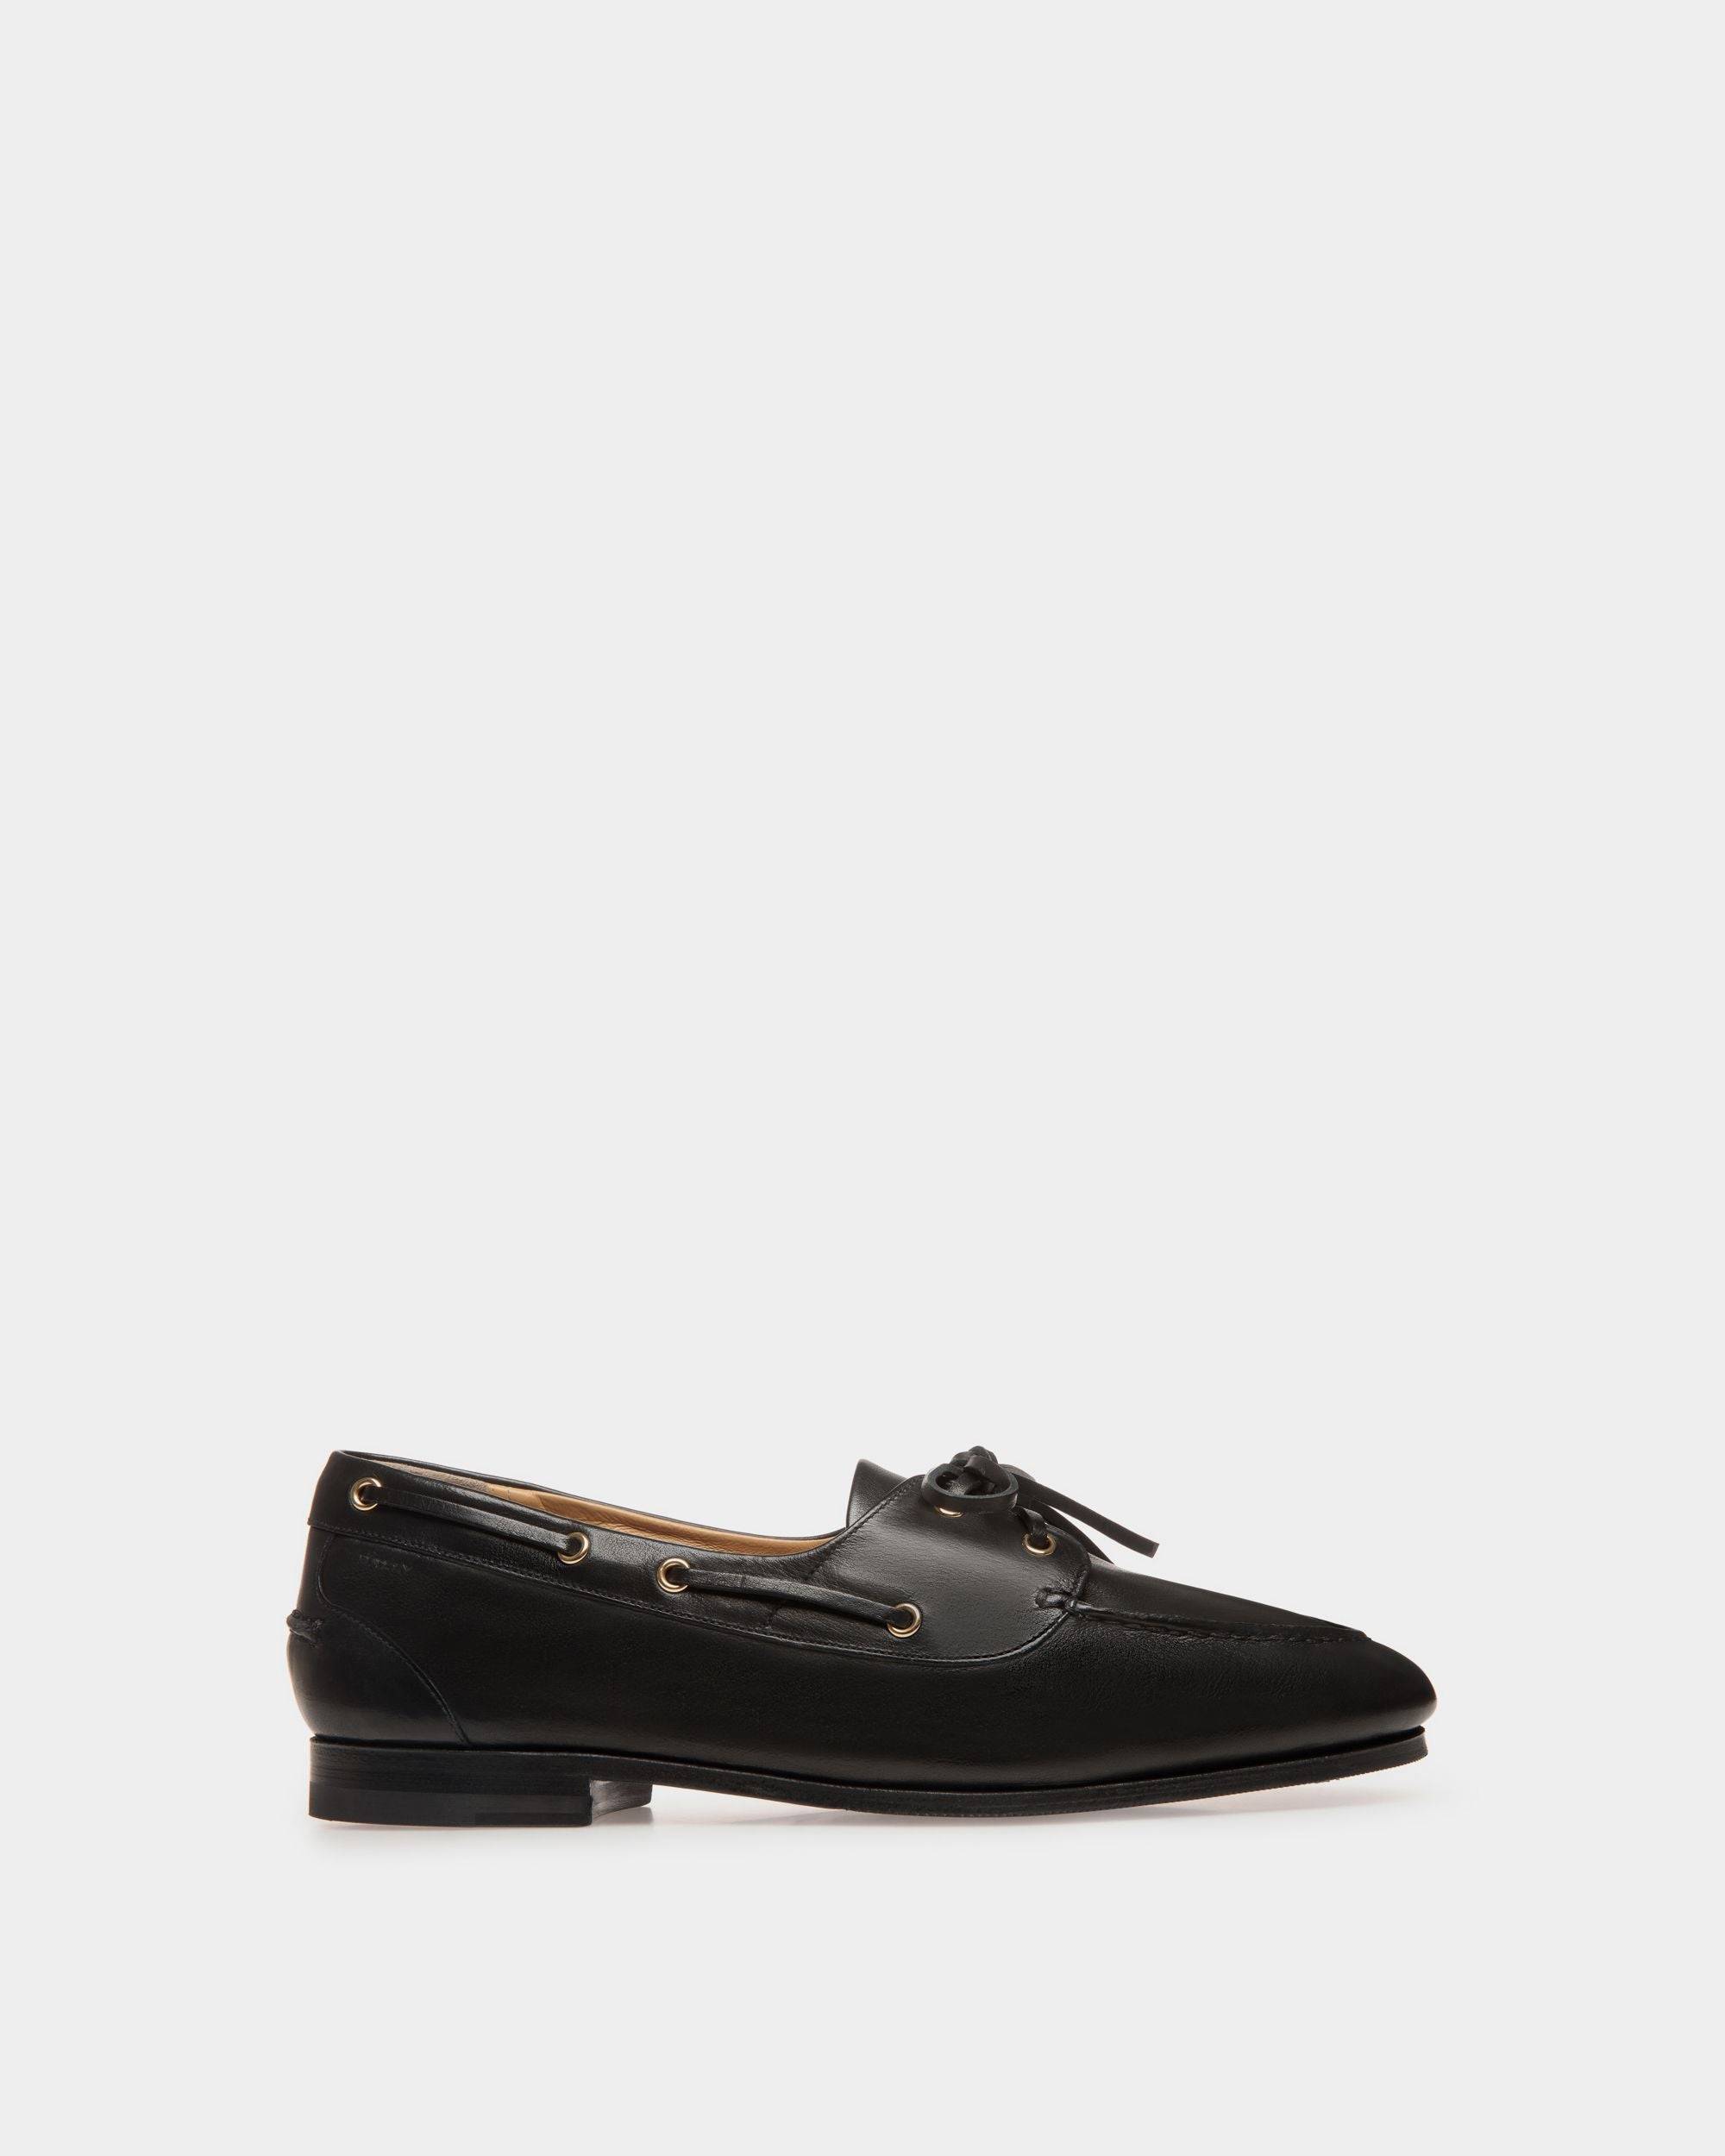 Men's Plume Moccasin in Black Leather | Bally | Still Life Side